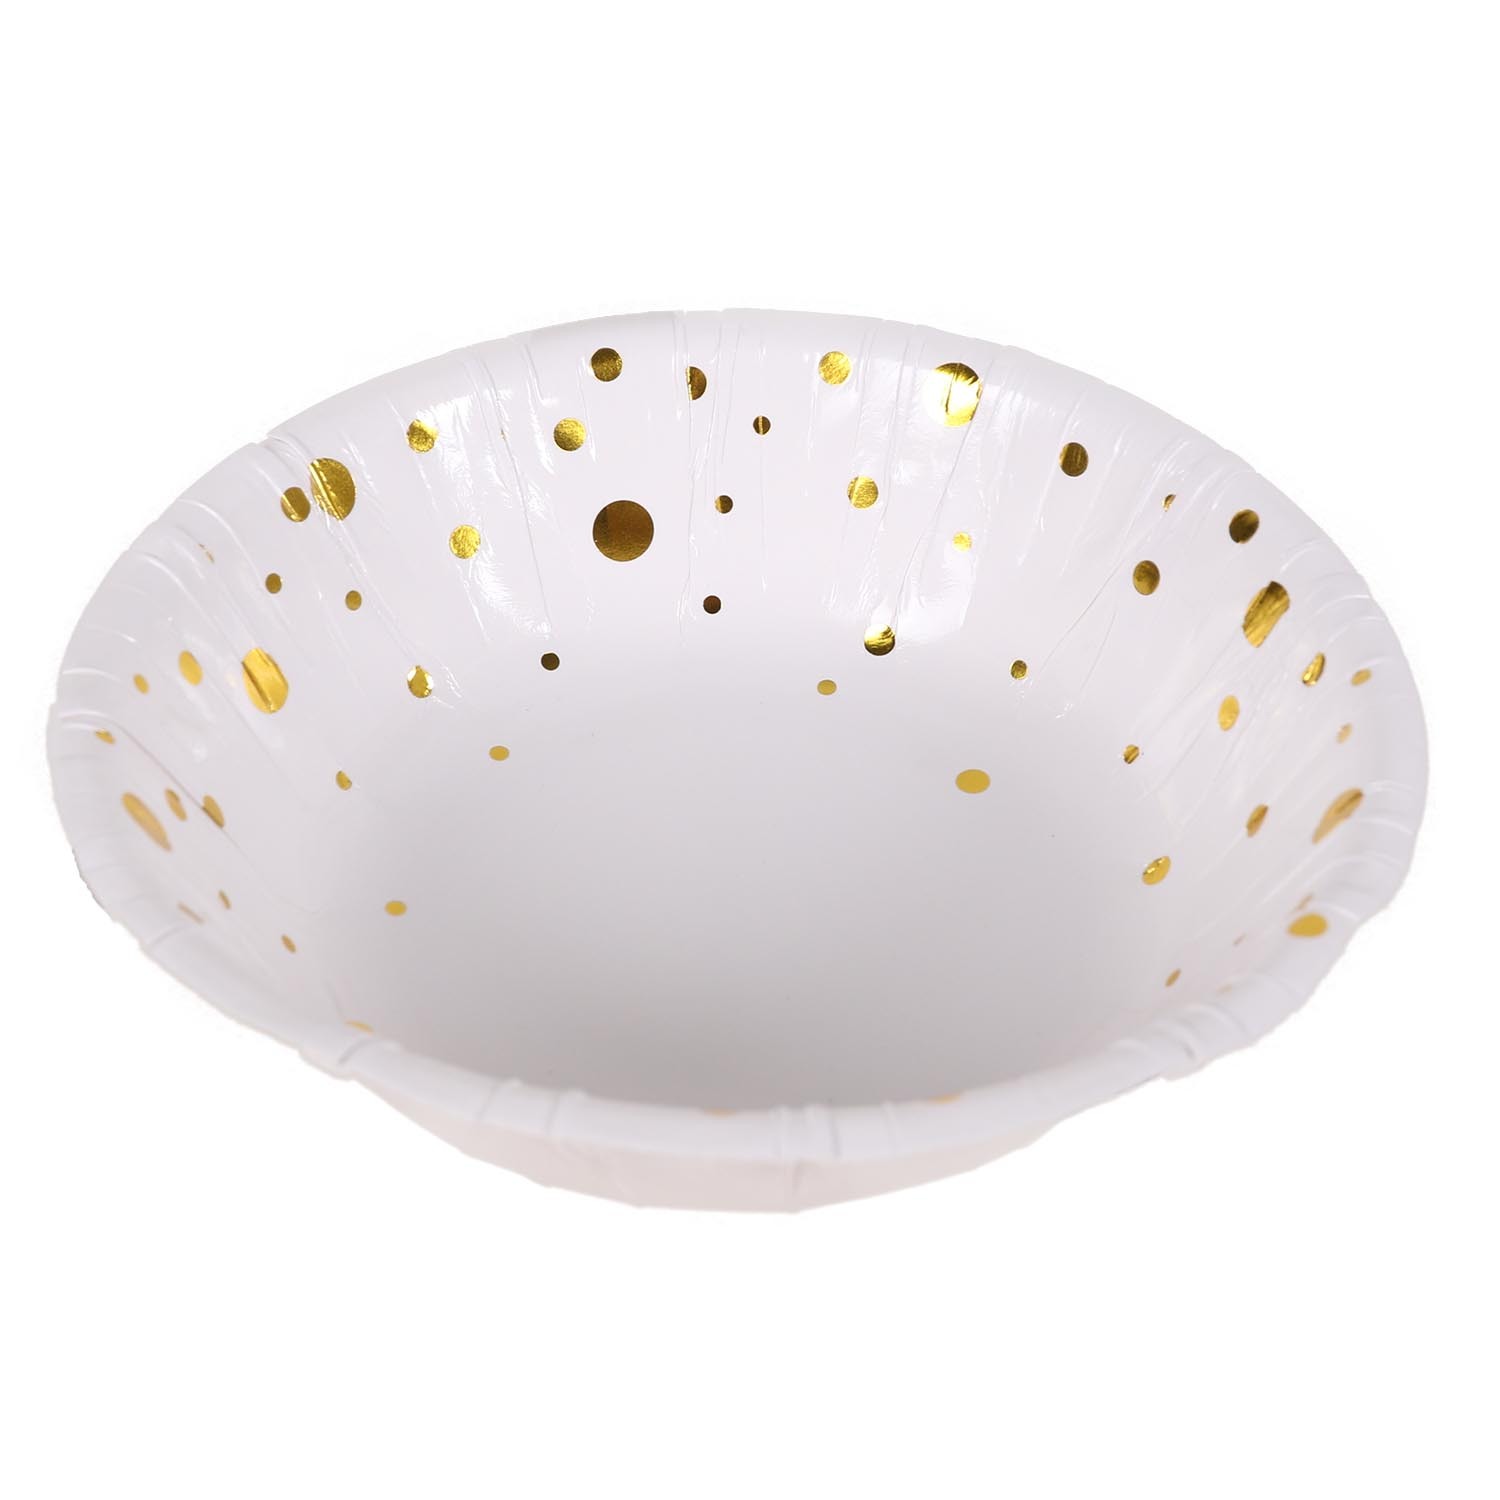 My Party Gold Foil Paper Bowls 8 Pack Image